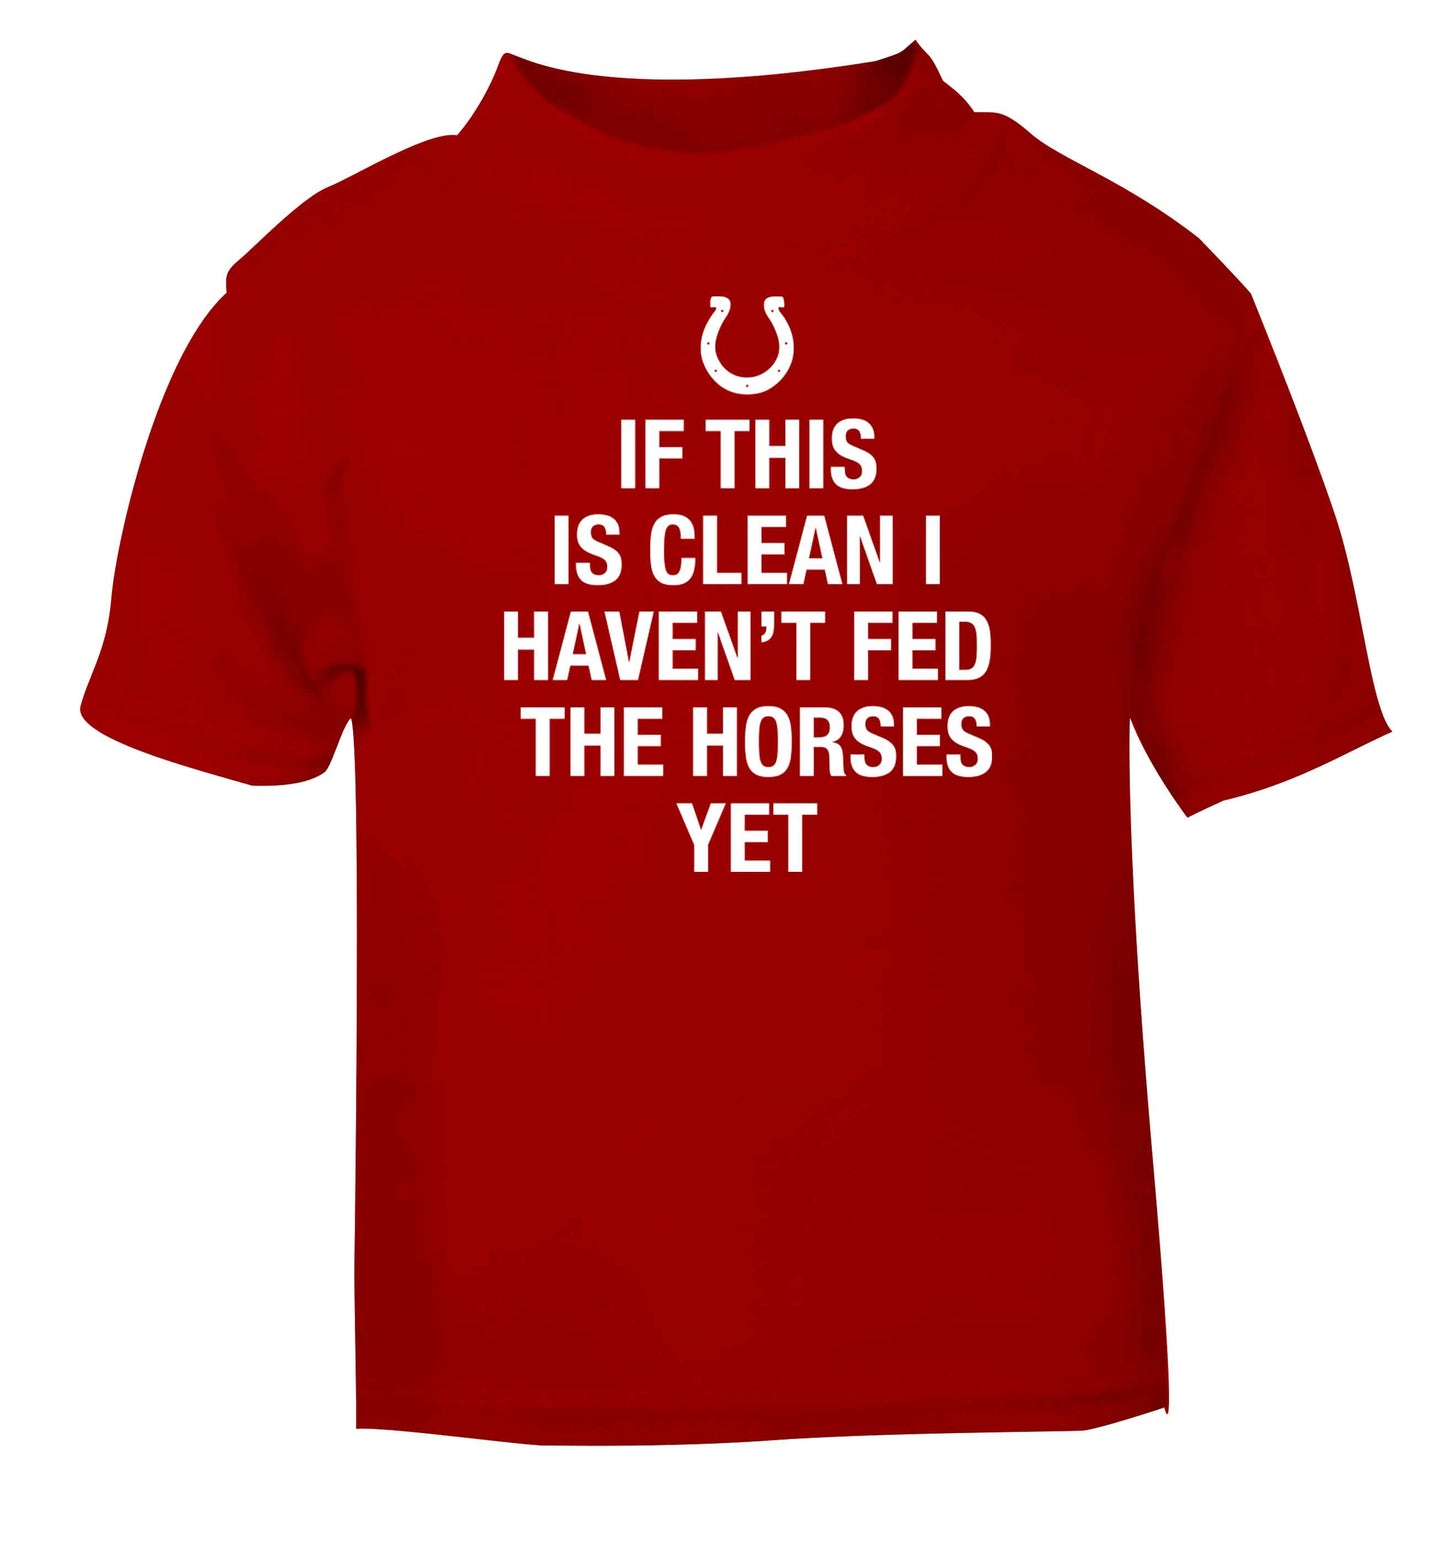 If this isn't clean I haven't fed the horses yet red baby toddler Tshirt 2 Years